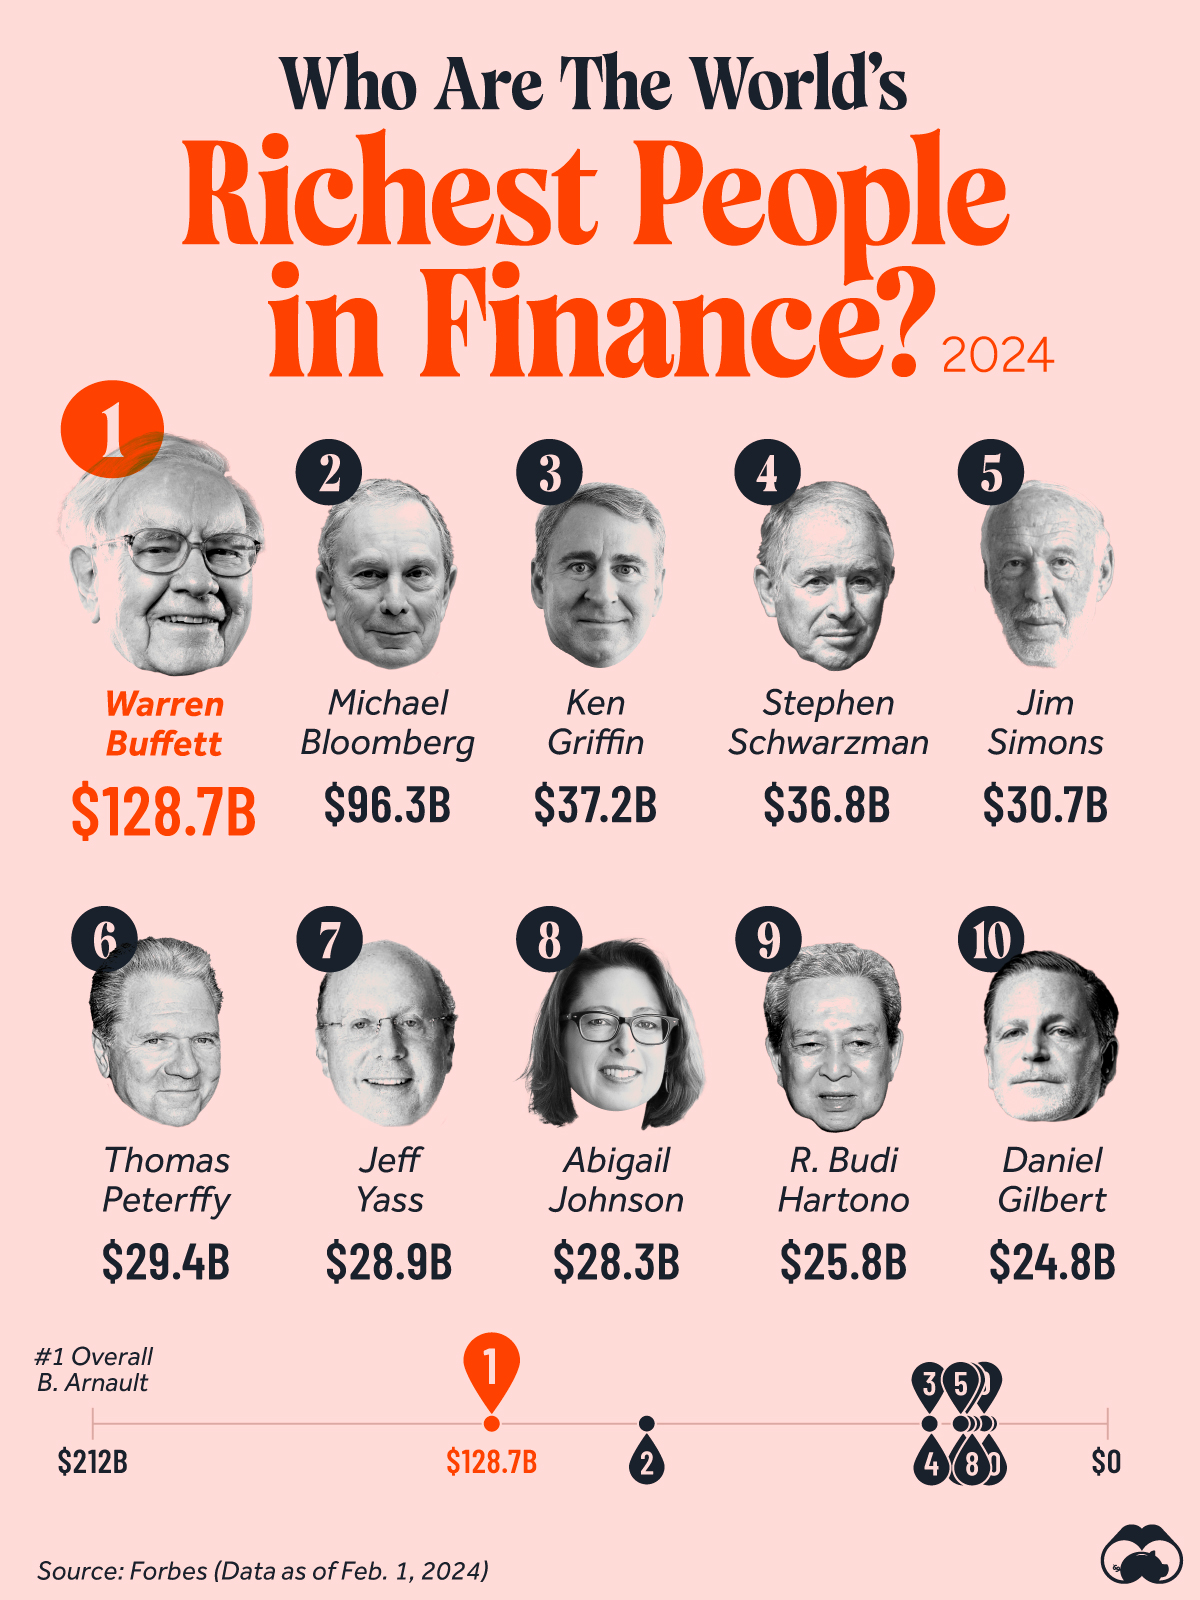 List of the world's richest people in finance.